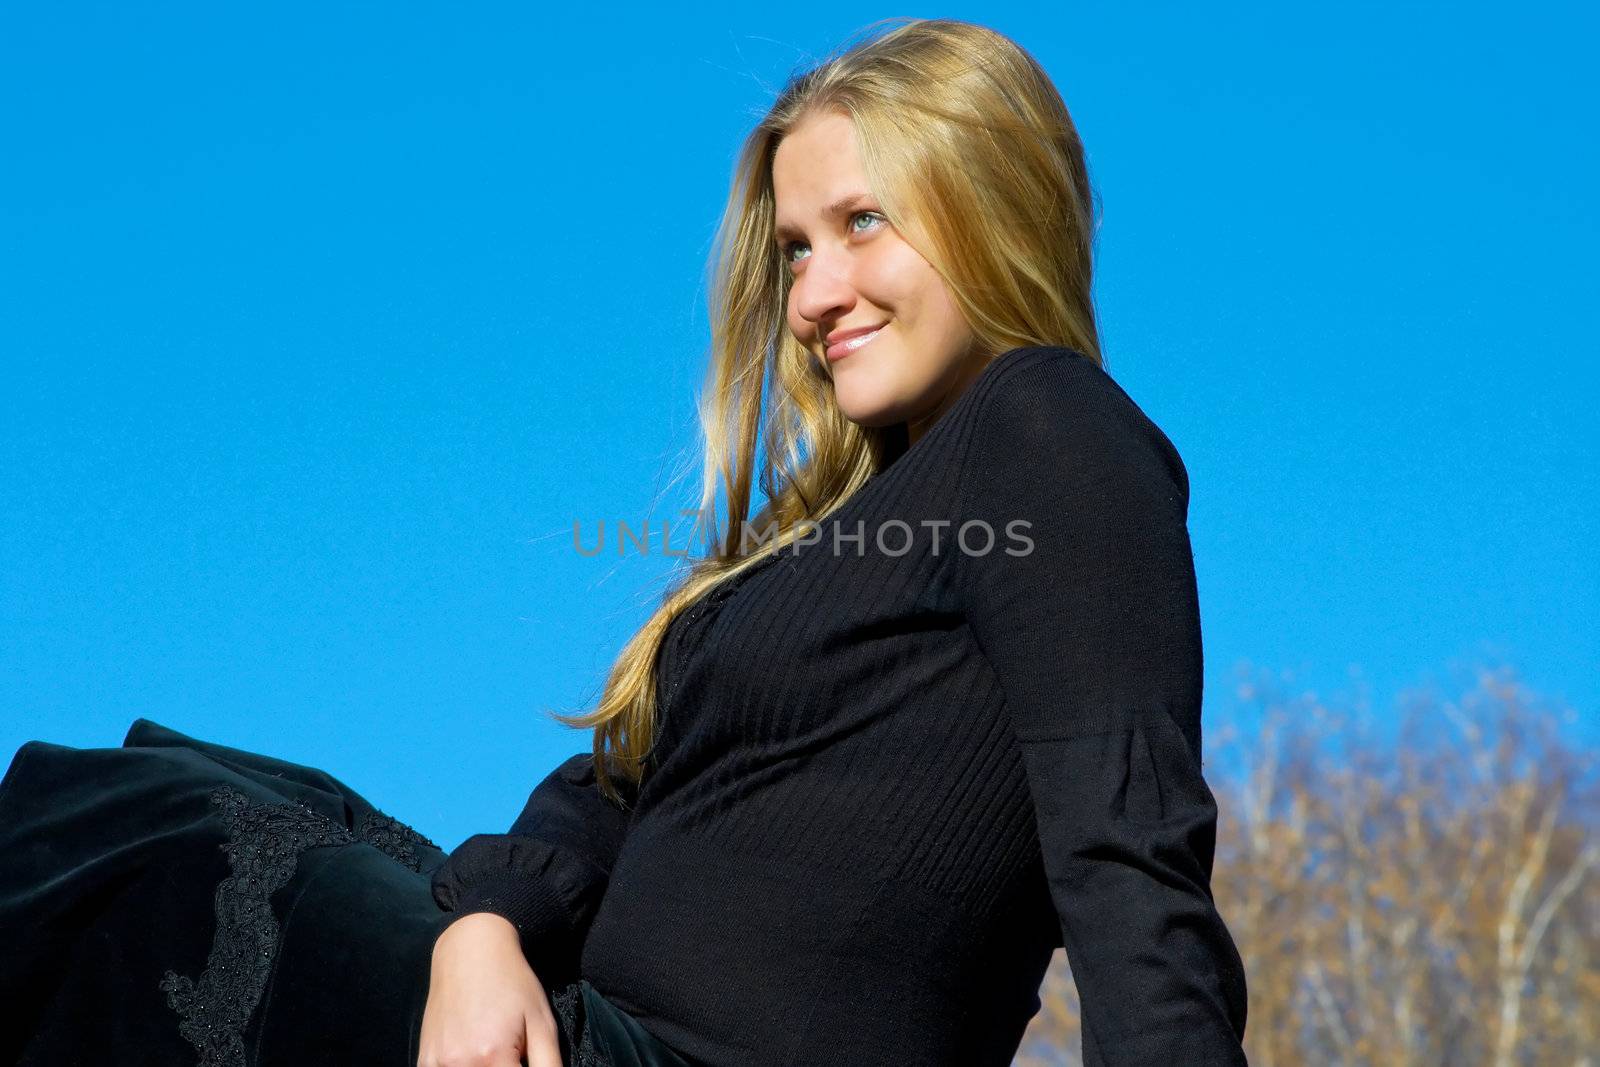 Portrait of the beautiful young girl against blue sky